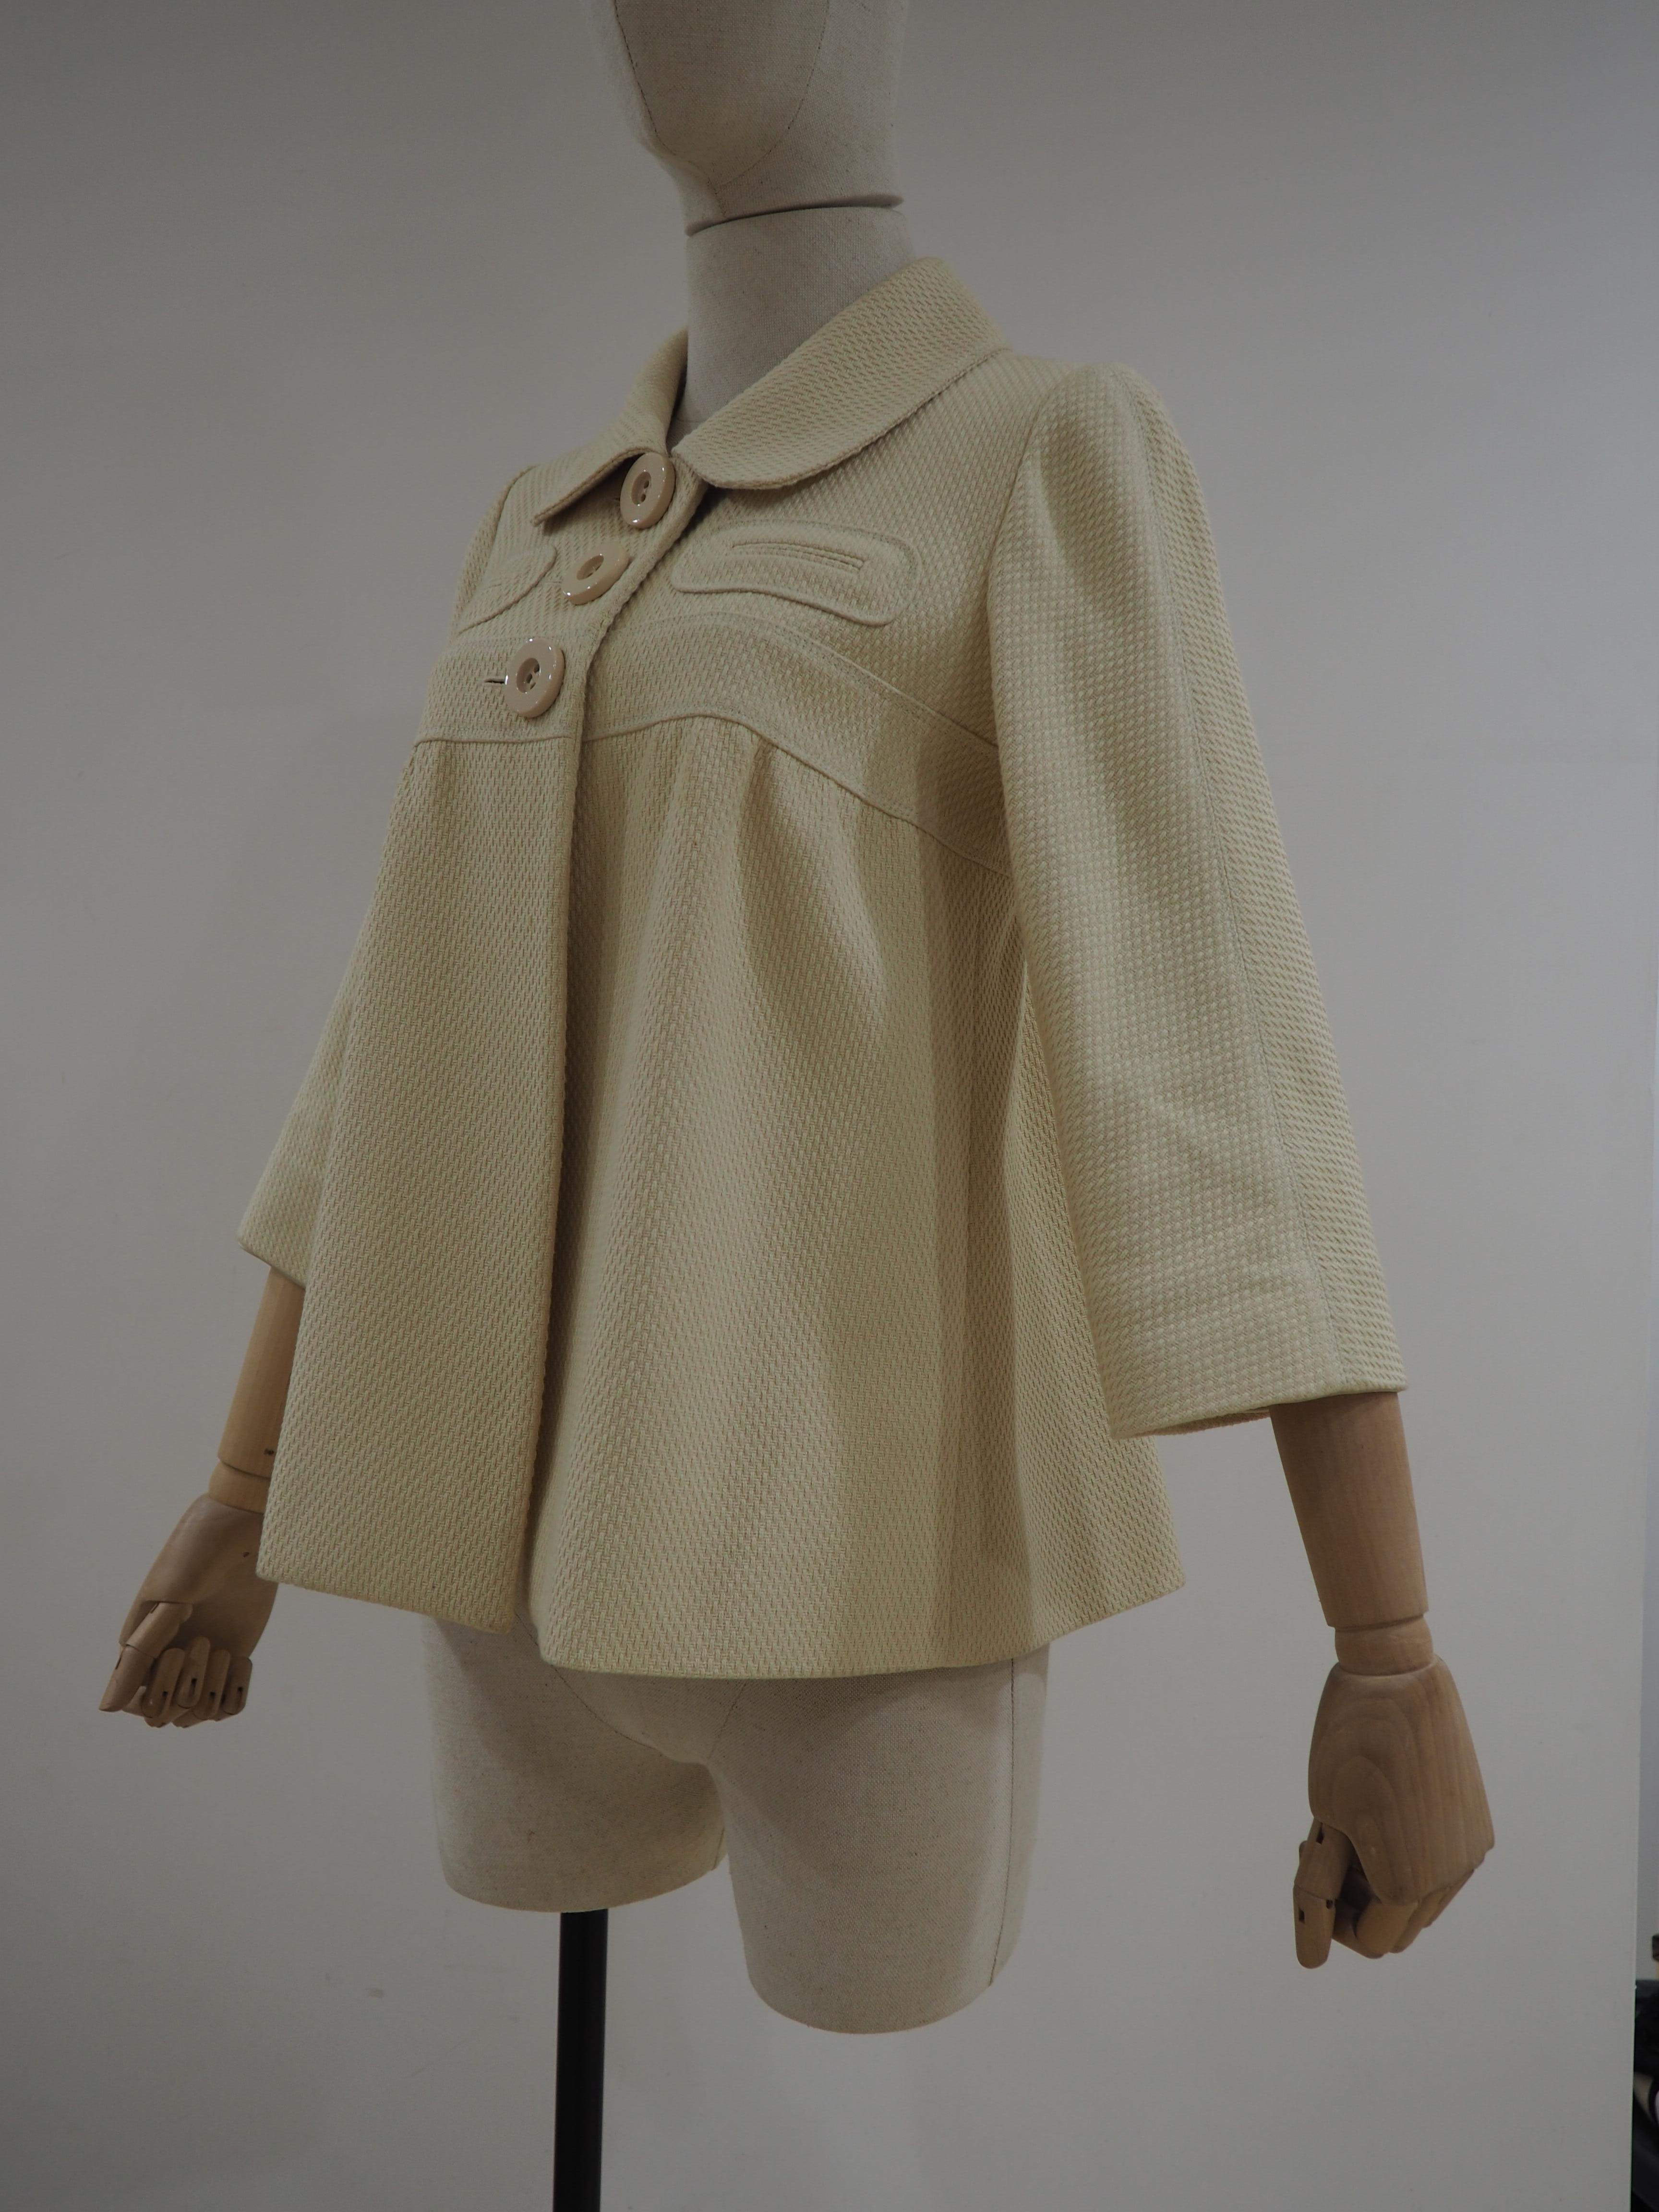 Chloè sable coat
totally made in France in size FR 40 